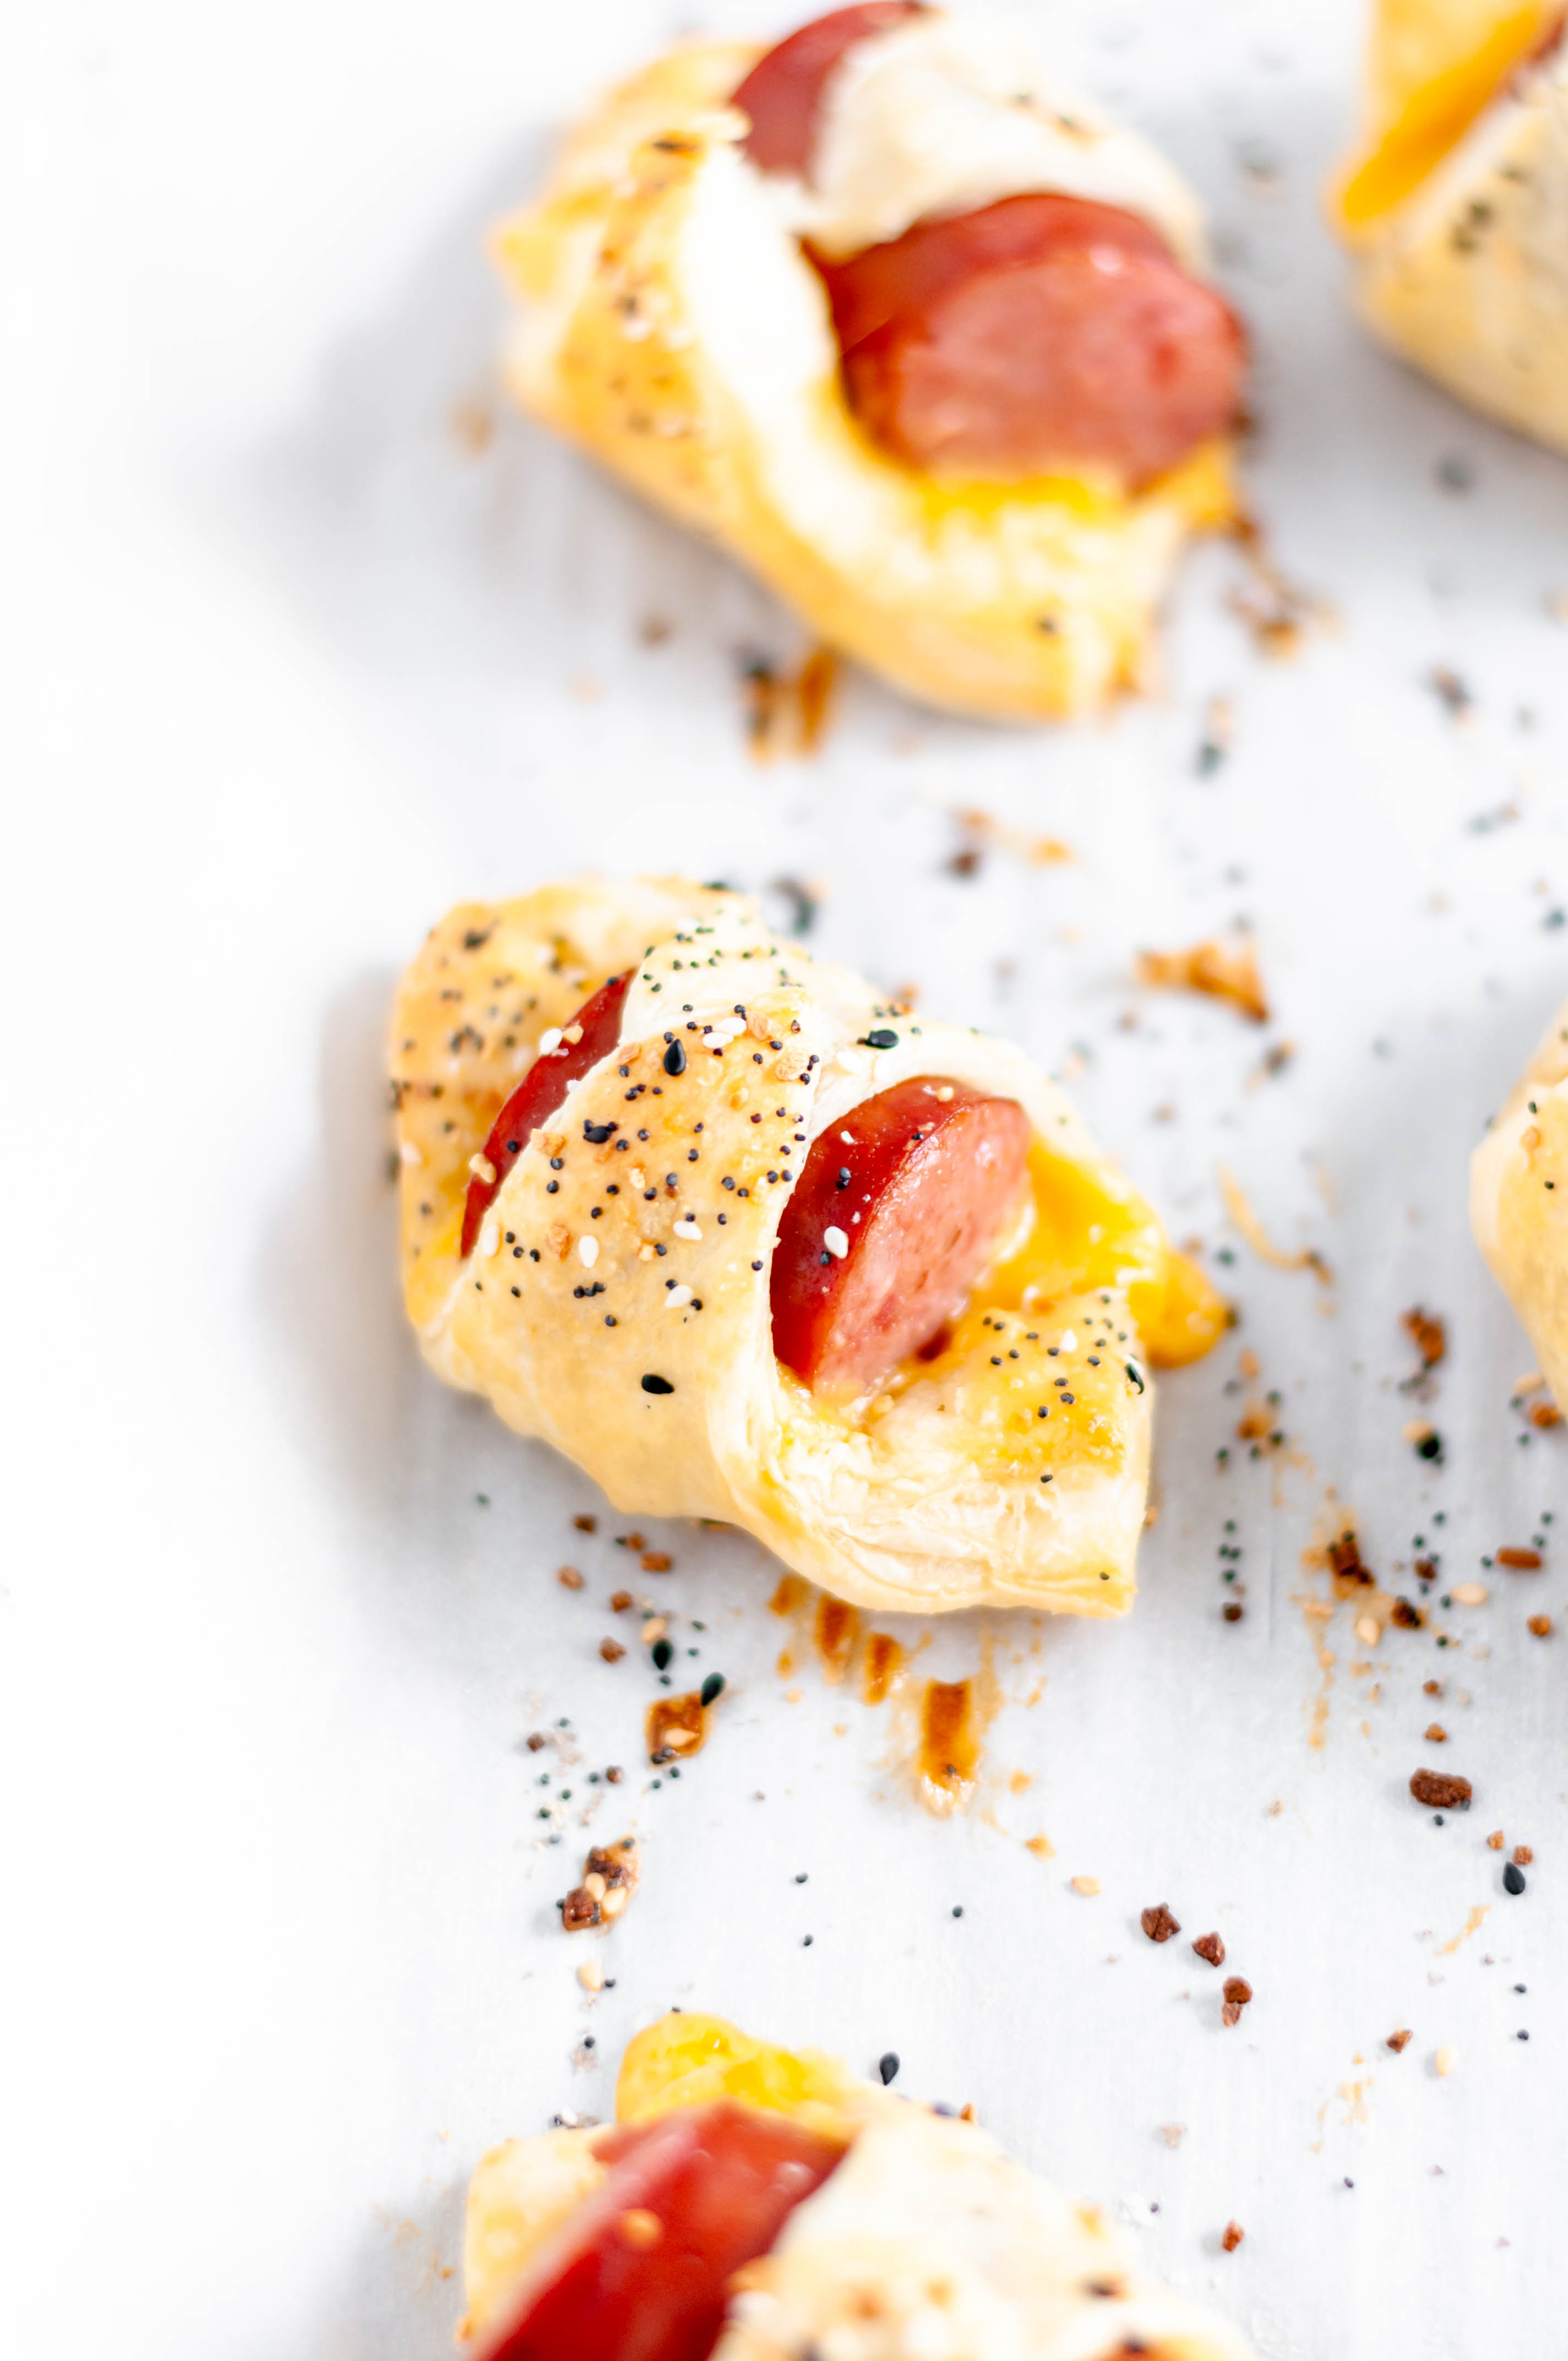 It's almost football season and that means it's time for all the football food and appetizer. Start the game with these Cheesy Pigs in a Blanket.